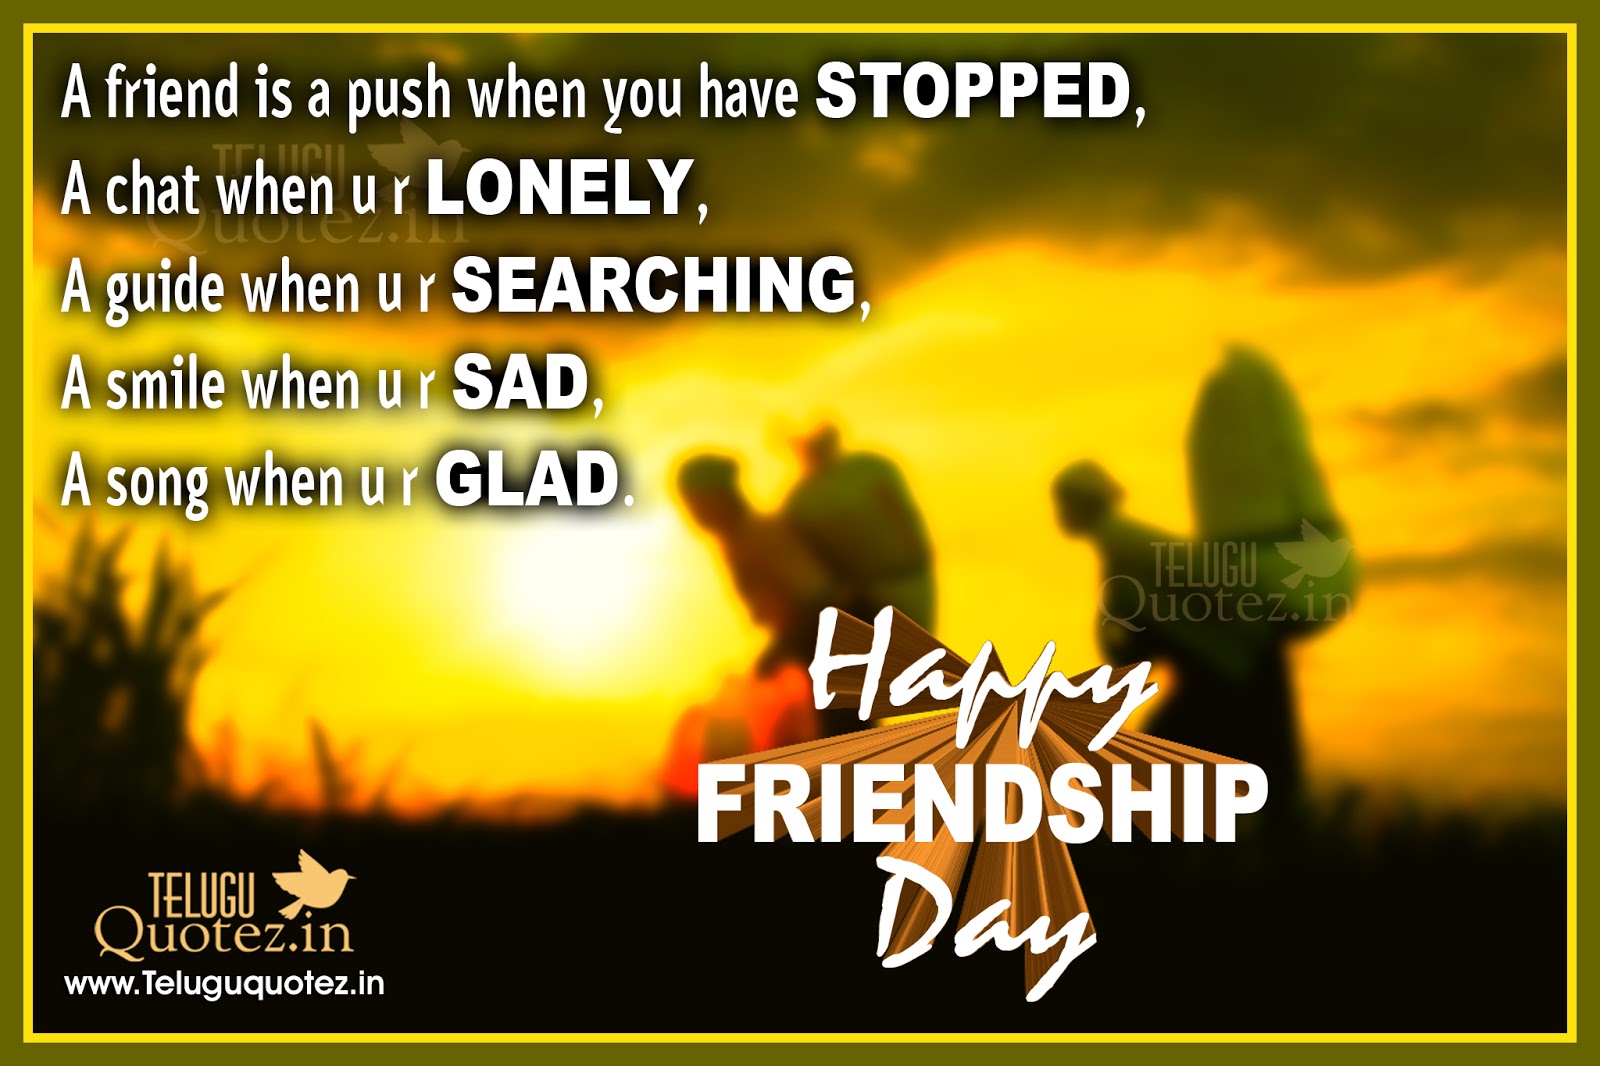 Friendship Day Quotes Bangla Happy friendship day sms quotes images teluguquotez